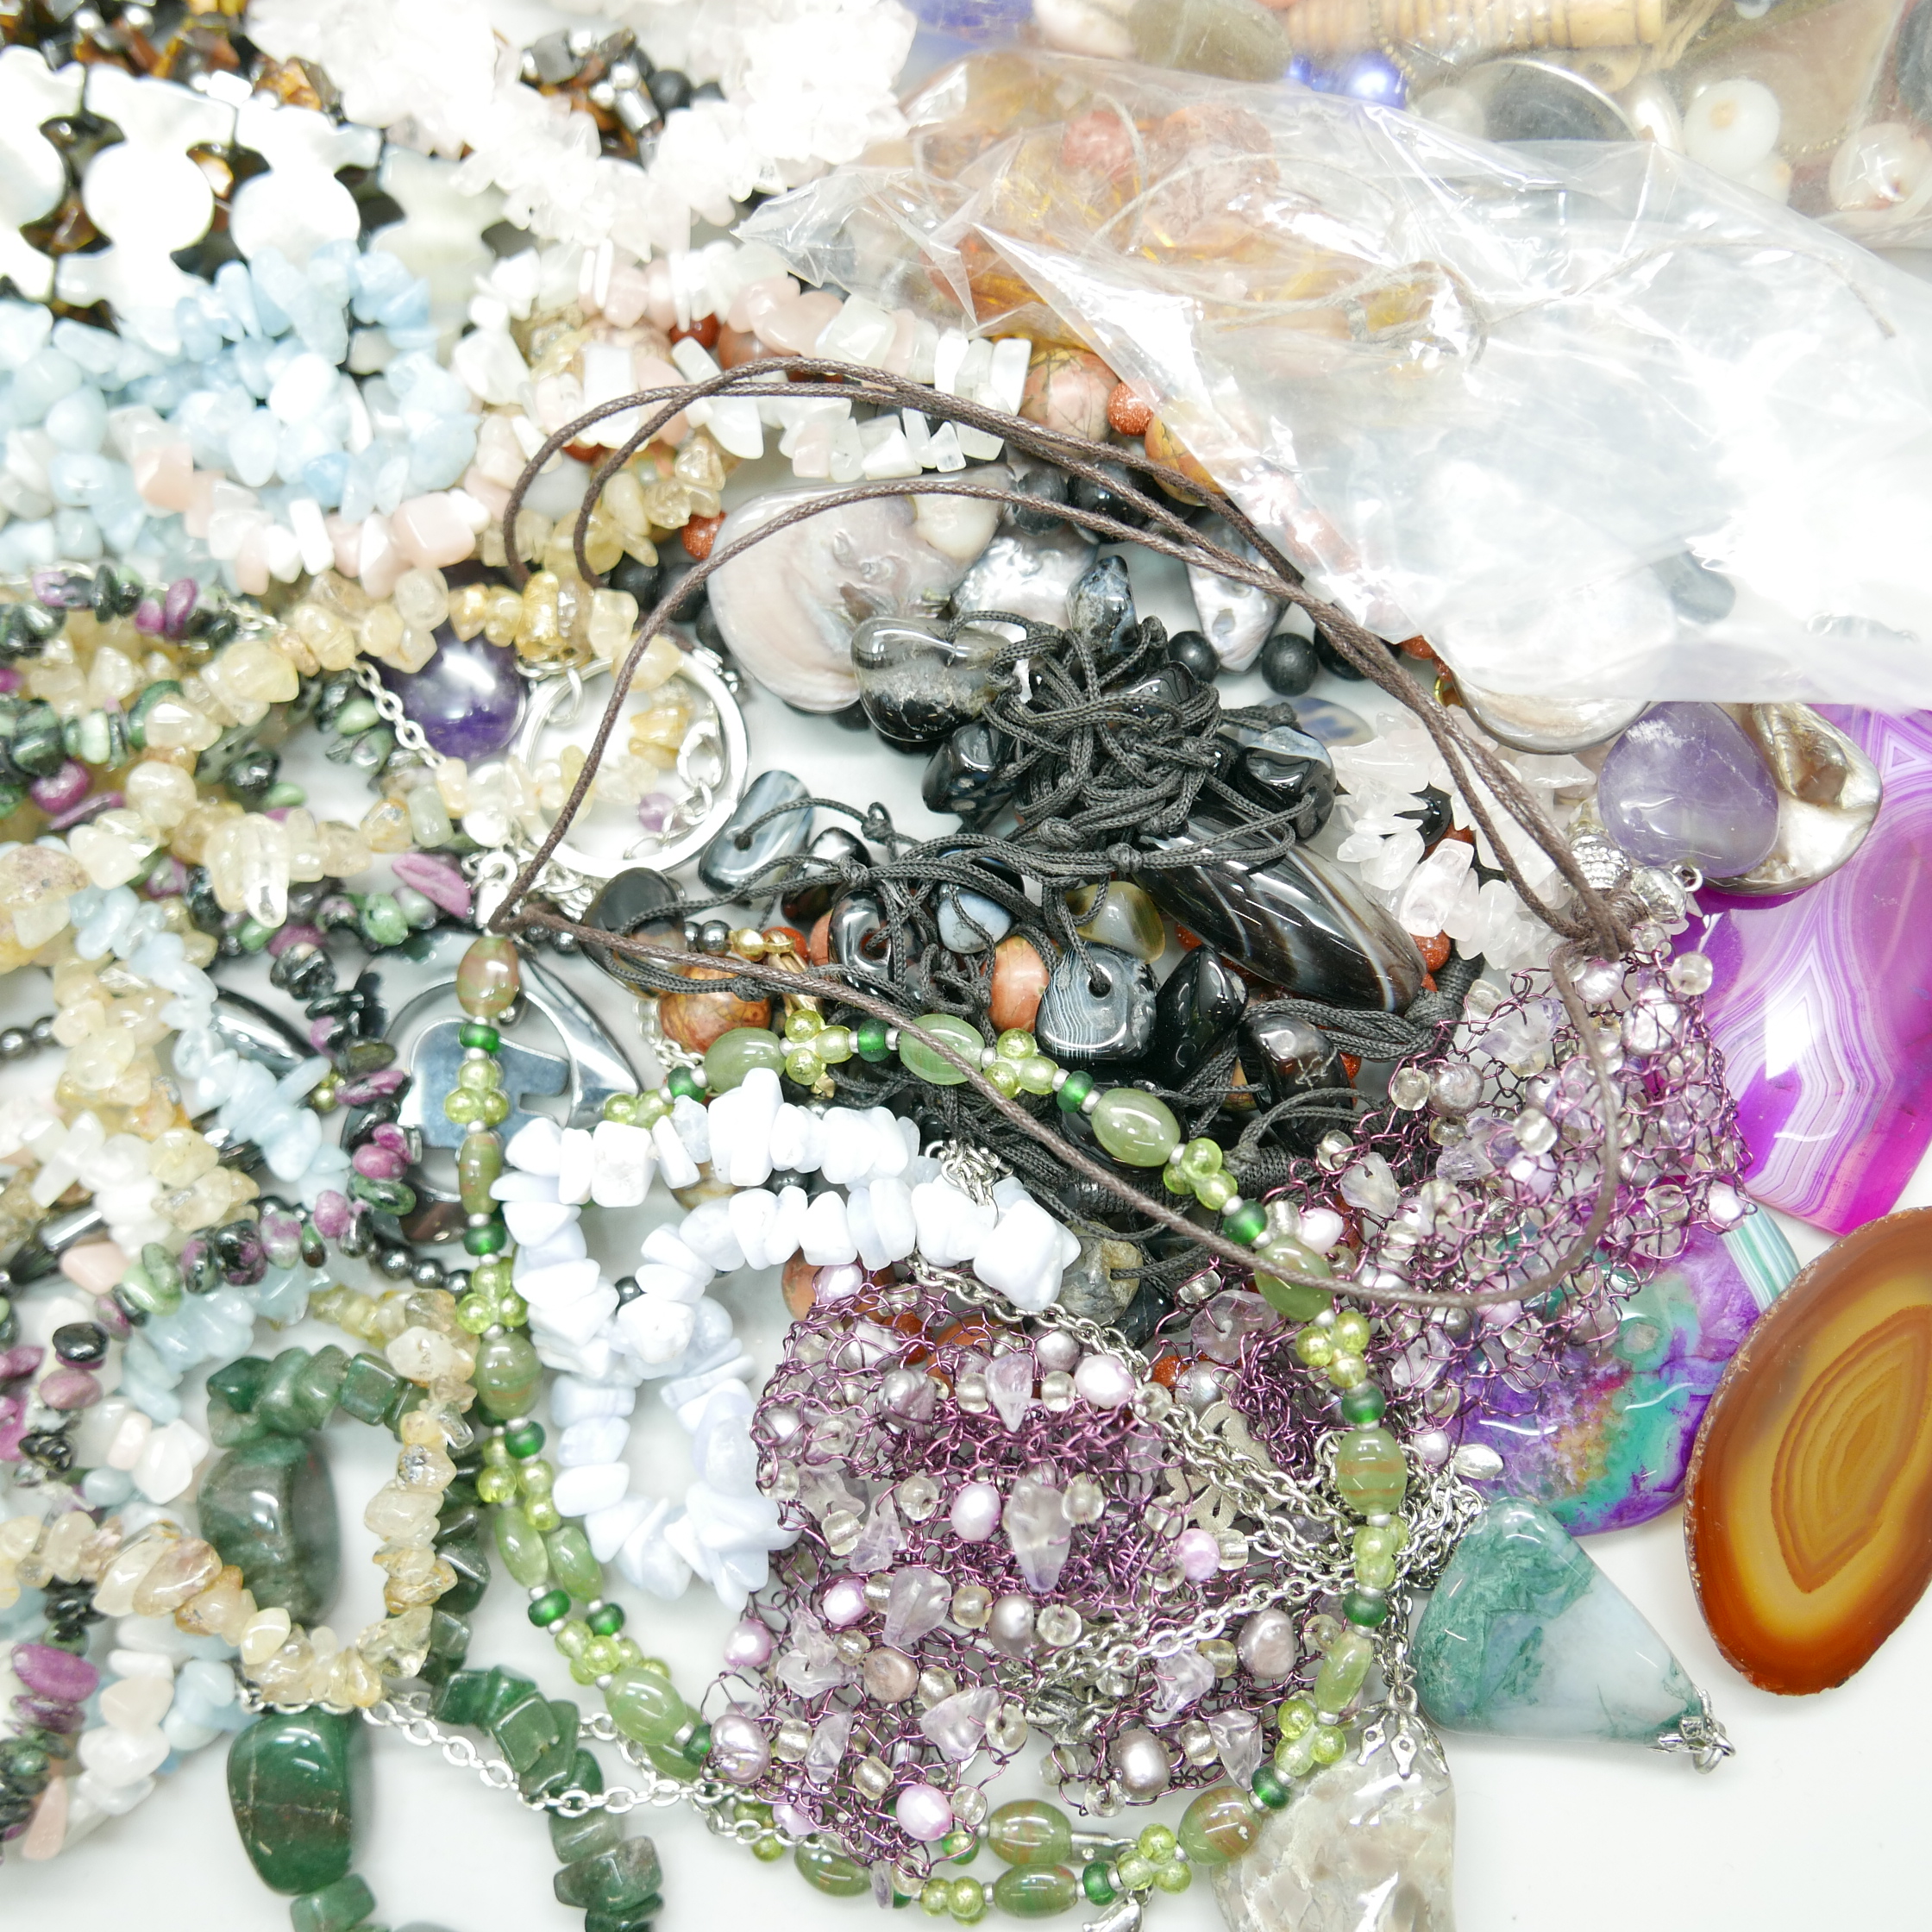 Gemstone jewellery and loose beads - Image 3 of 5